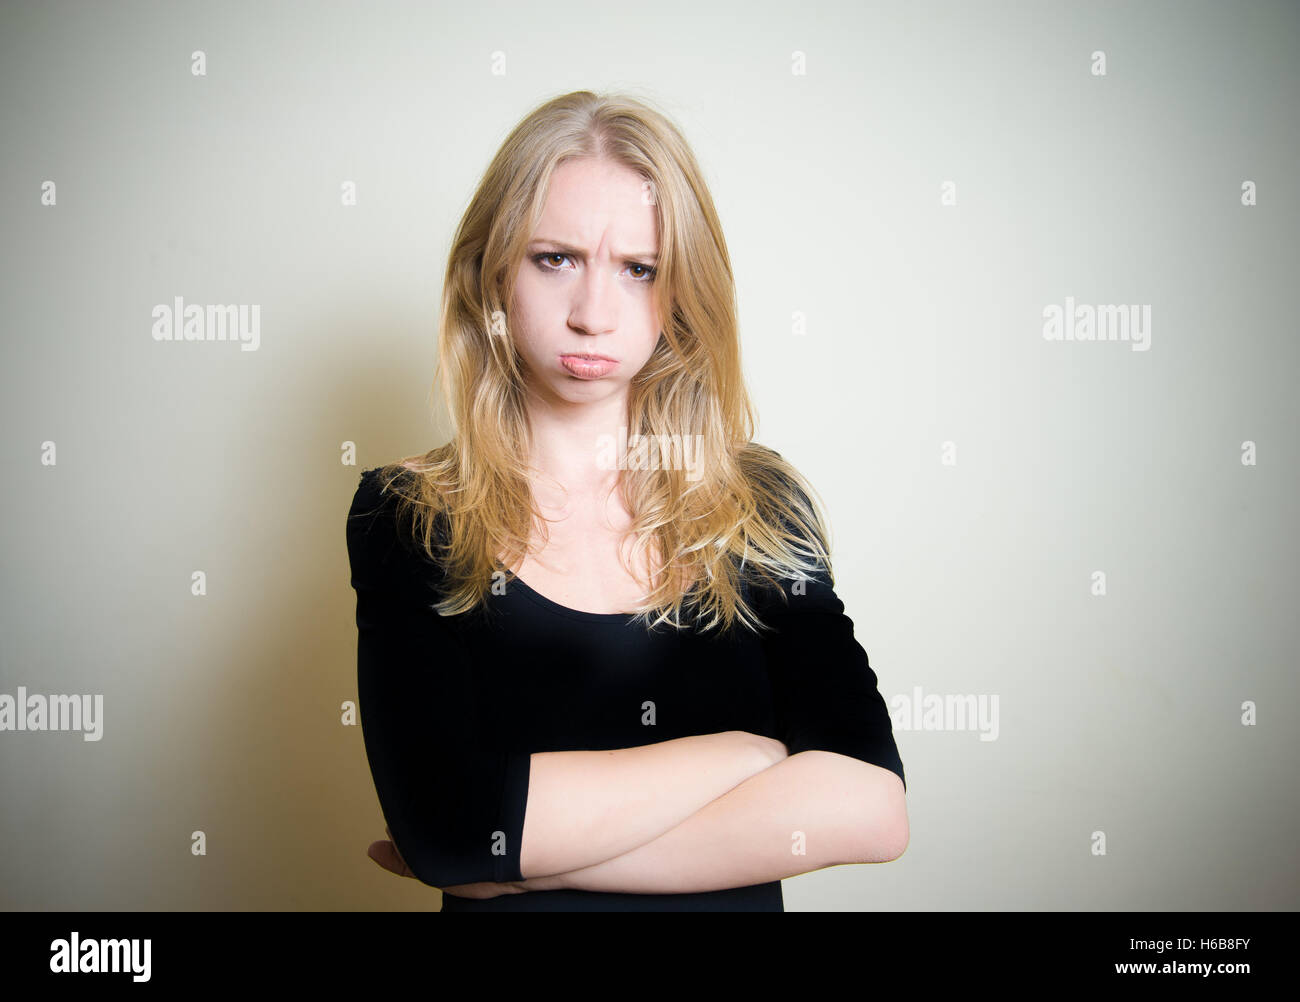 Young blonde attractive woman looking at camera, face expression angry, sullen, sulky, offended, peevish, clear wall in backgrou Stock Photo